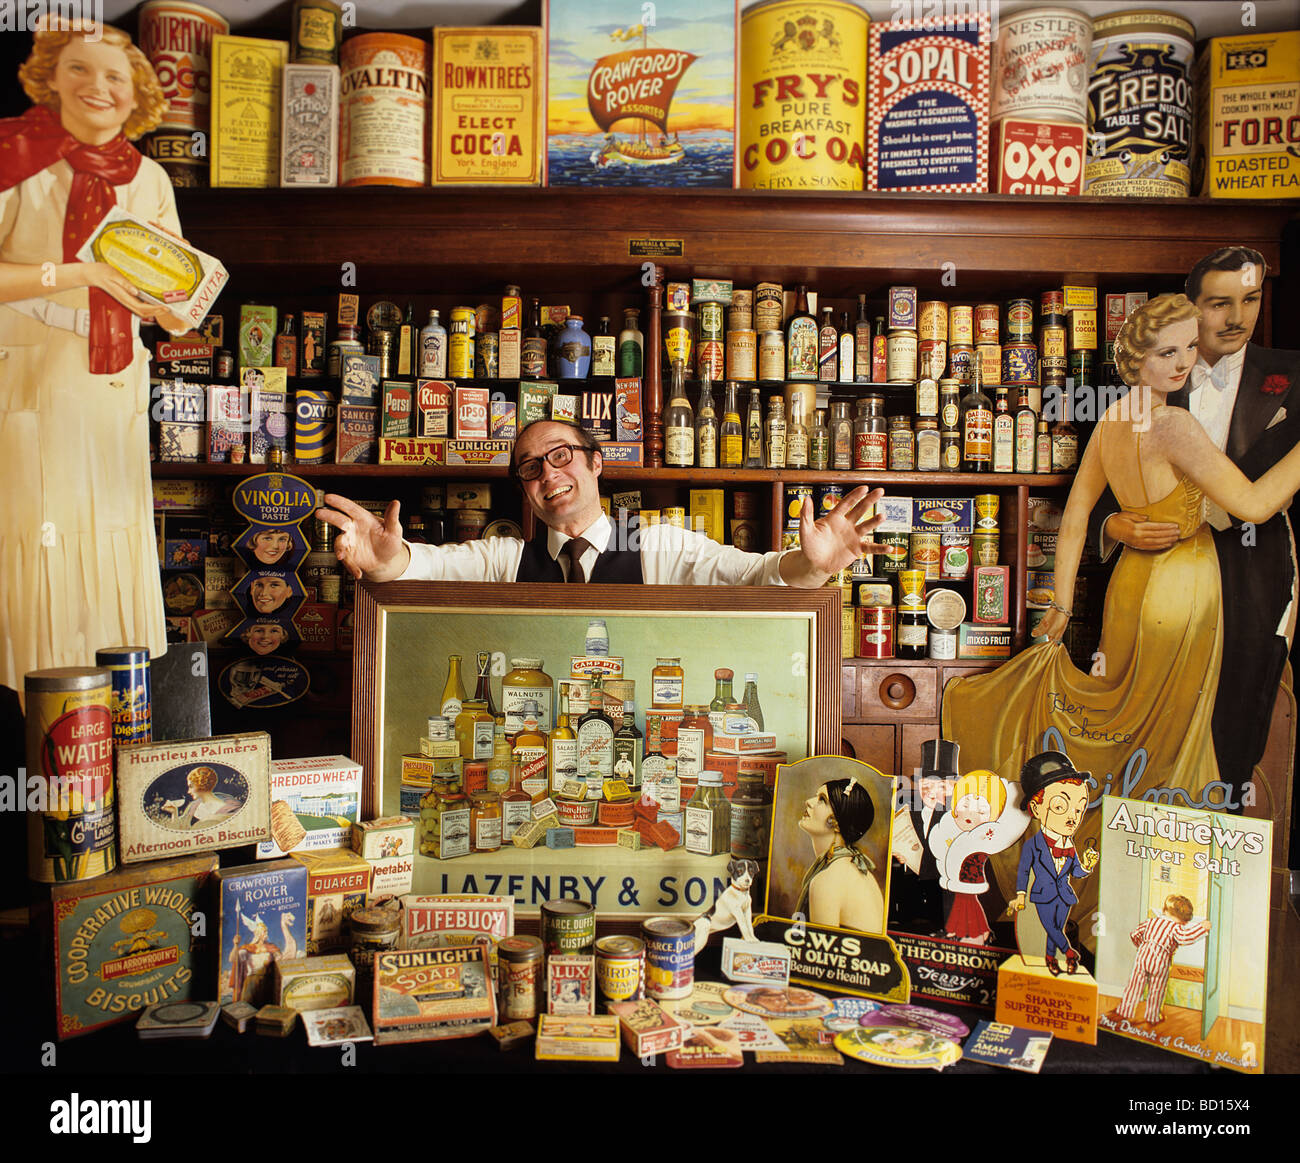 Robert Opie, collector of Advertising and Packaging, and museum curator (The Opie Collection), in his shop set-up. Stock Photo